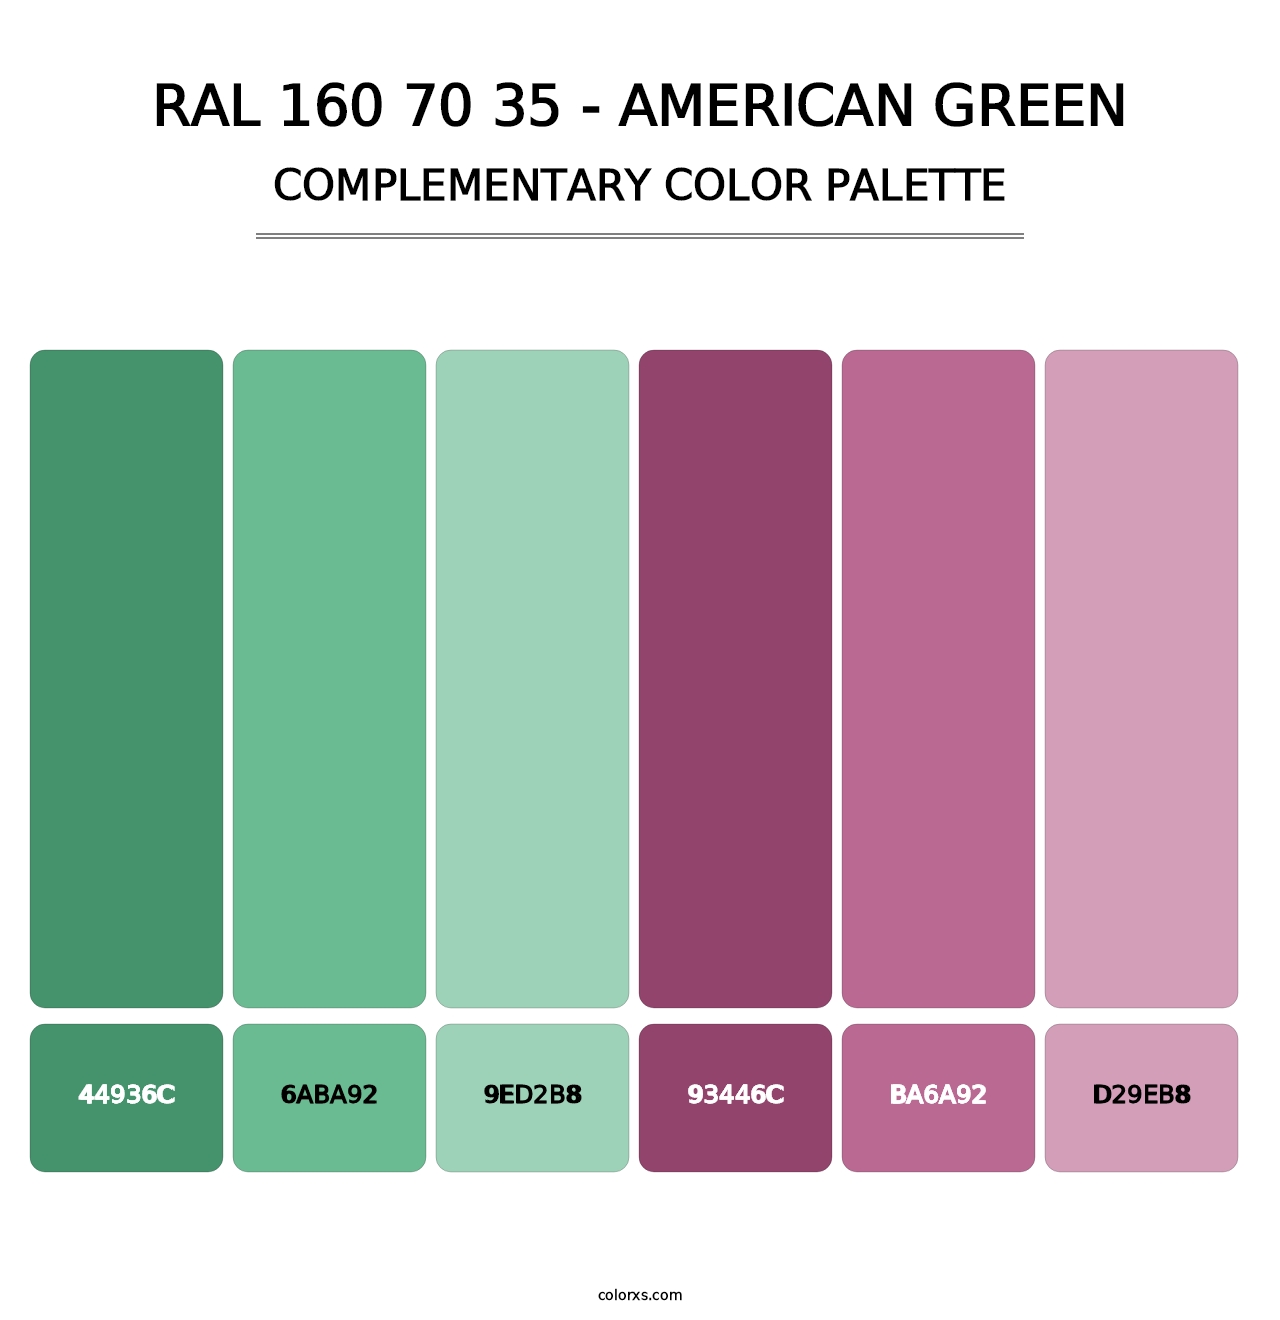 RAL 160 70 35 - American Green - Complementary Color Palette